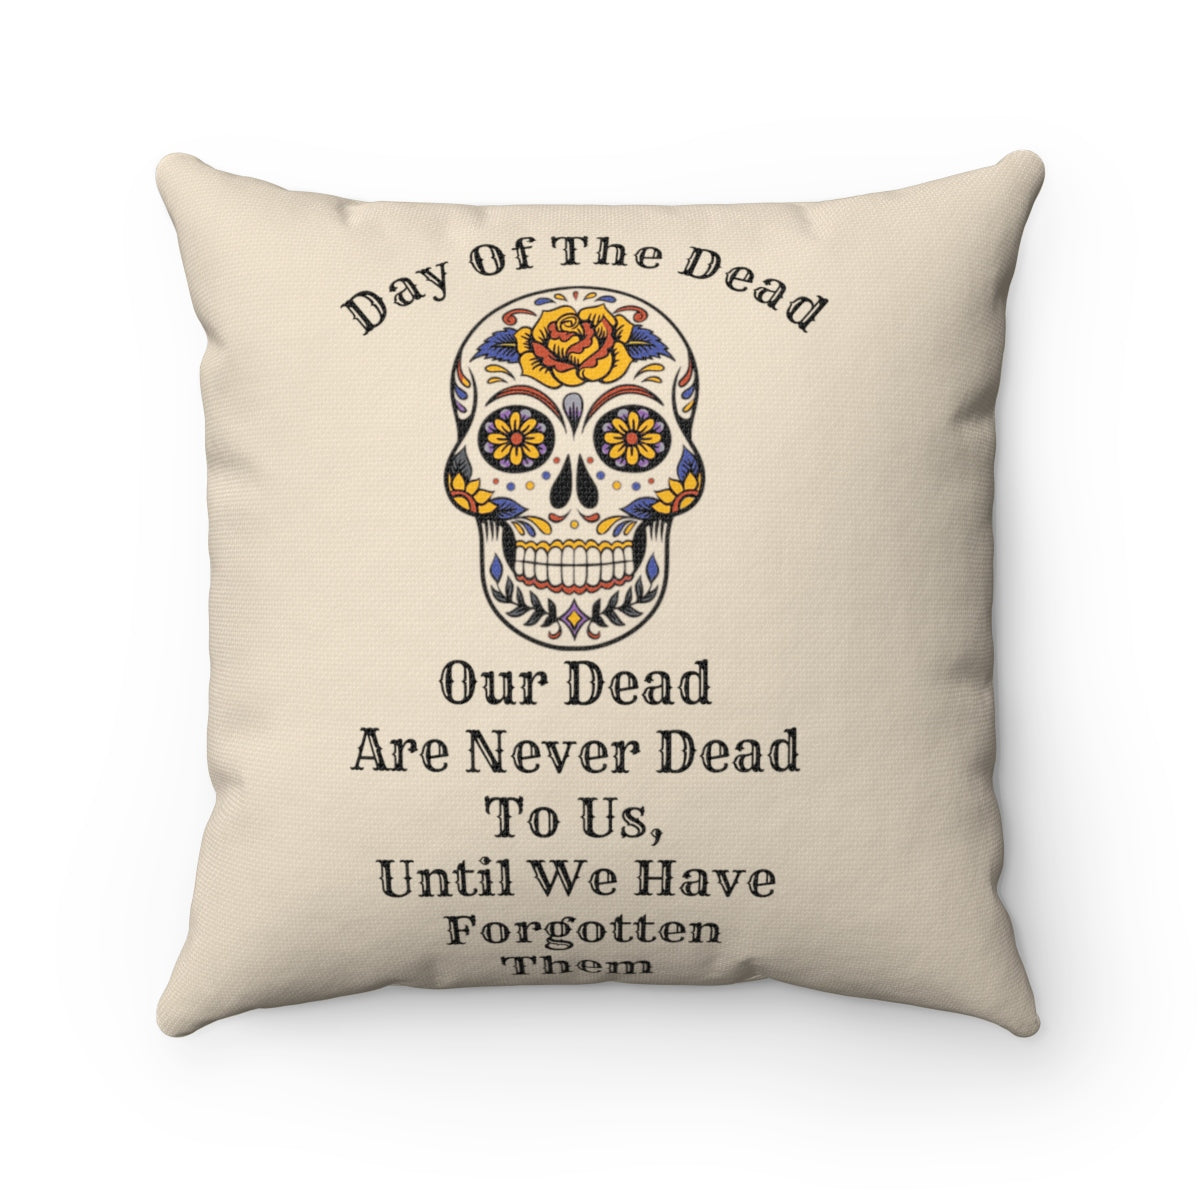 Day of the Dead Throw Pillow Decorative Couch Accent Pillow Home Room Decor